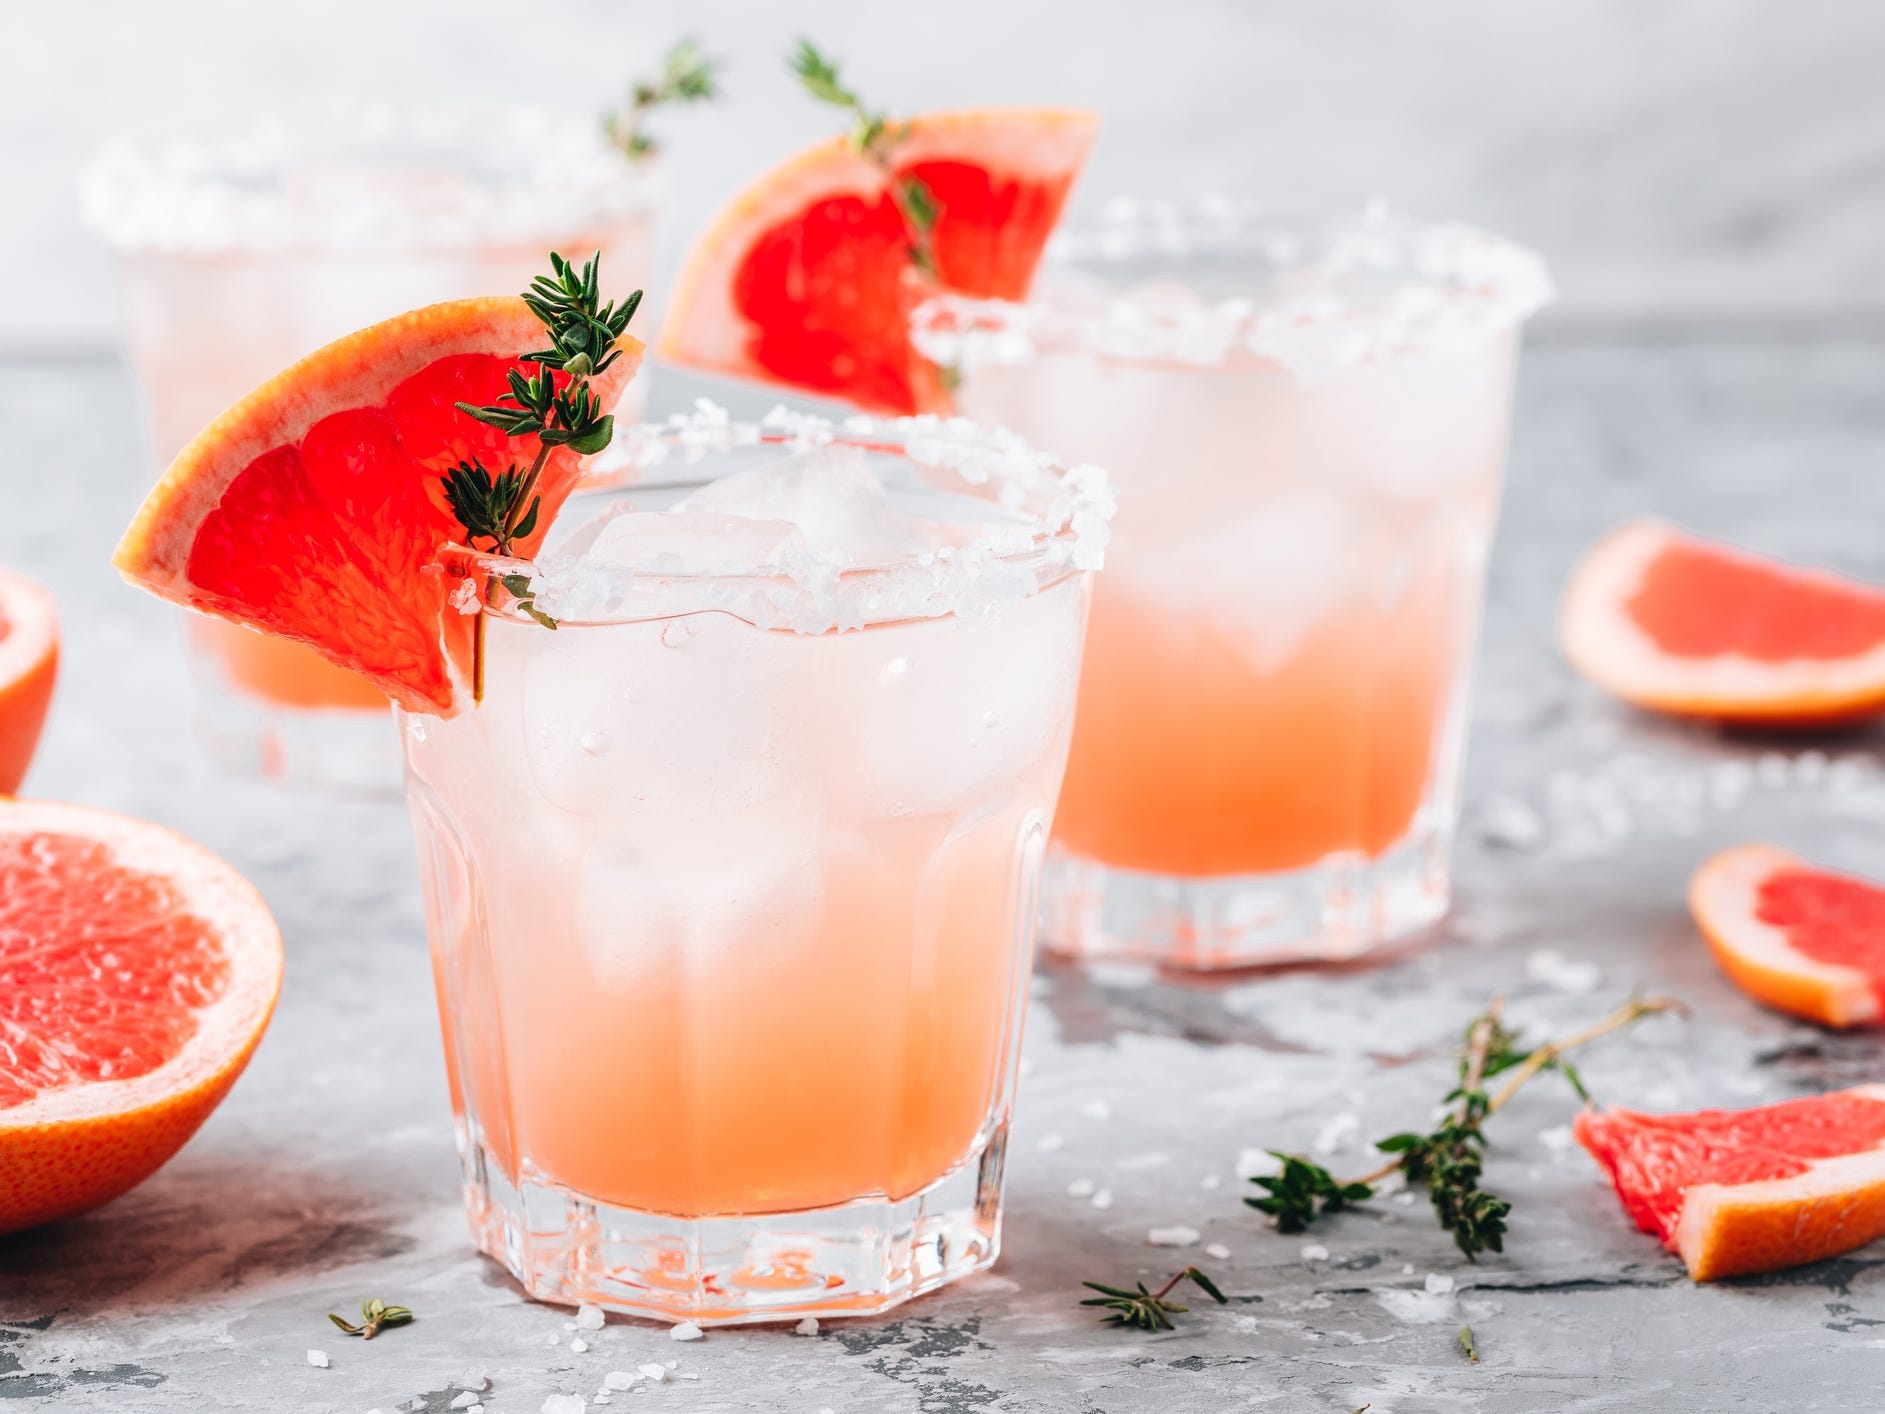 Two paloma cocktails garnished with grapefruit wedges and rosemary